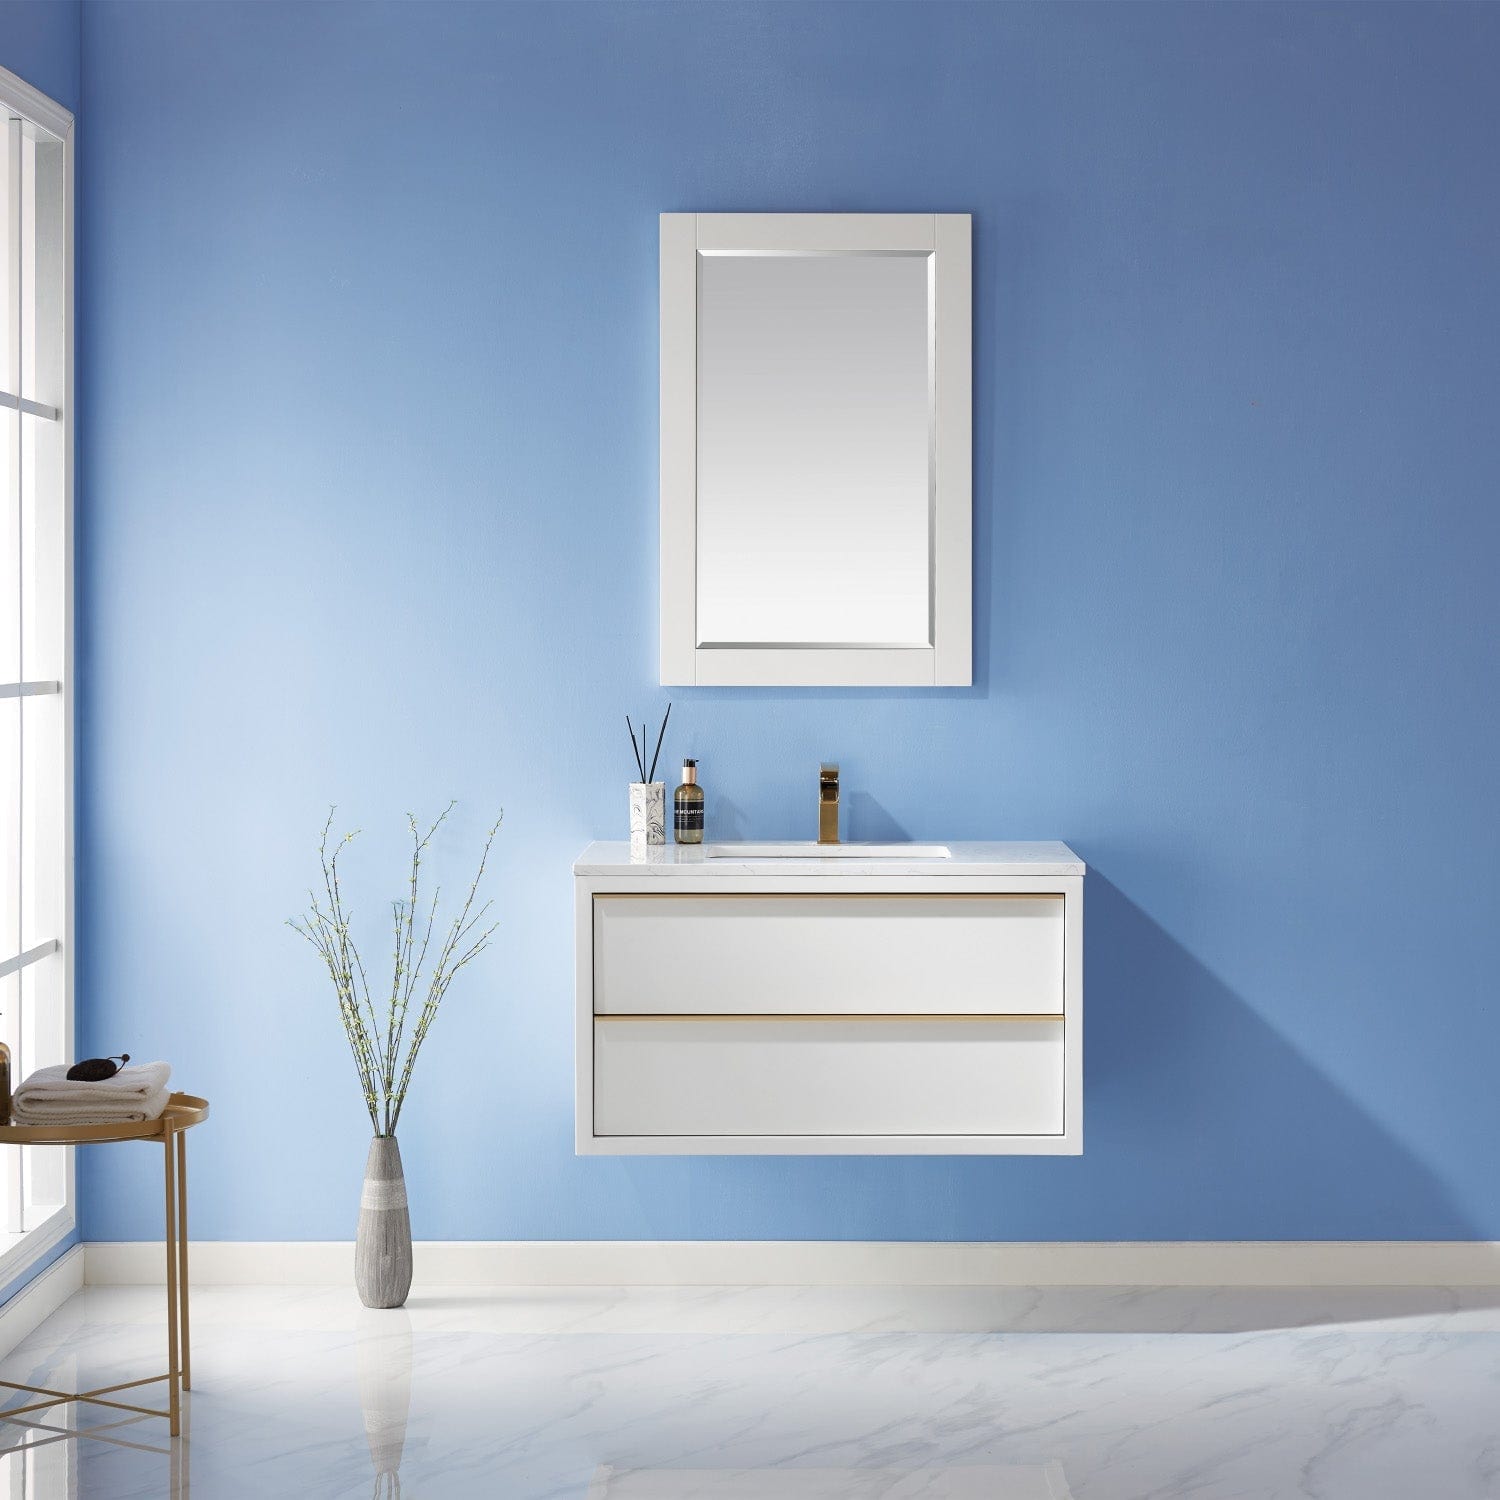 Altair Morgan 36" Single Bathroom Vanity Set in White and Composite Carrara White Stone Countertop with Mirror 534036-WH-AW - Molaix631112971751Vanity534036-WH-AW